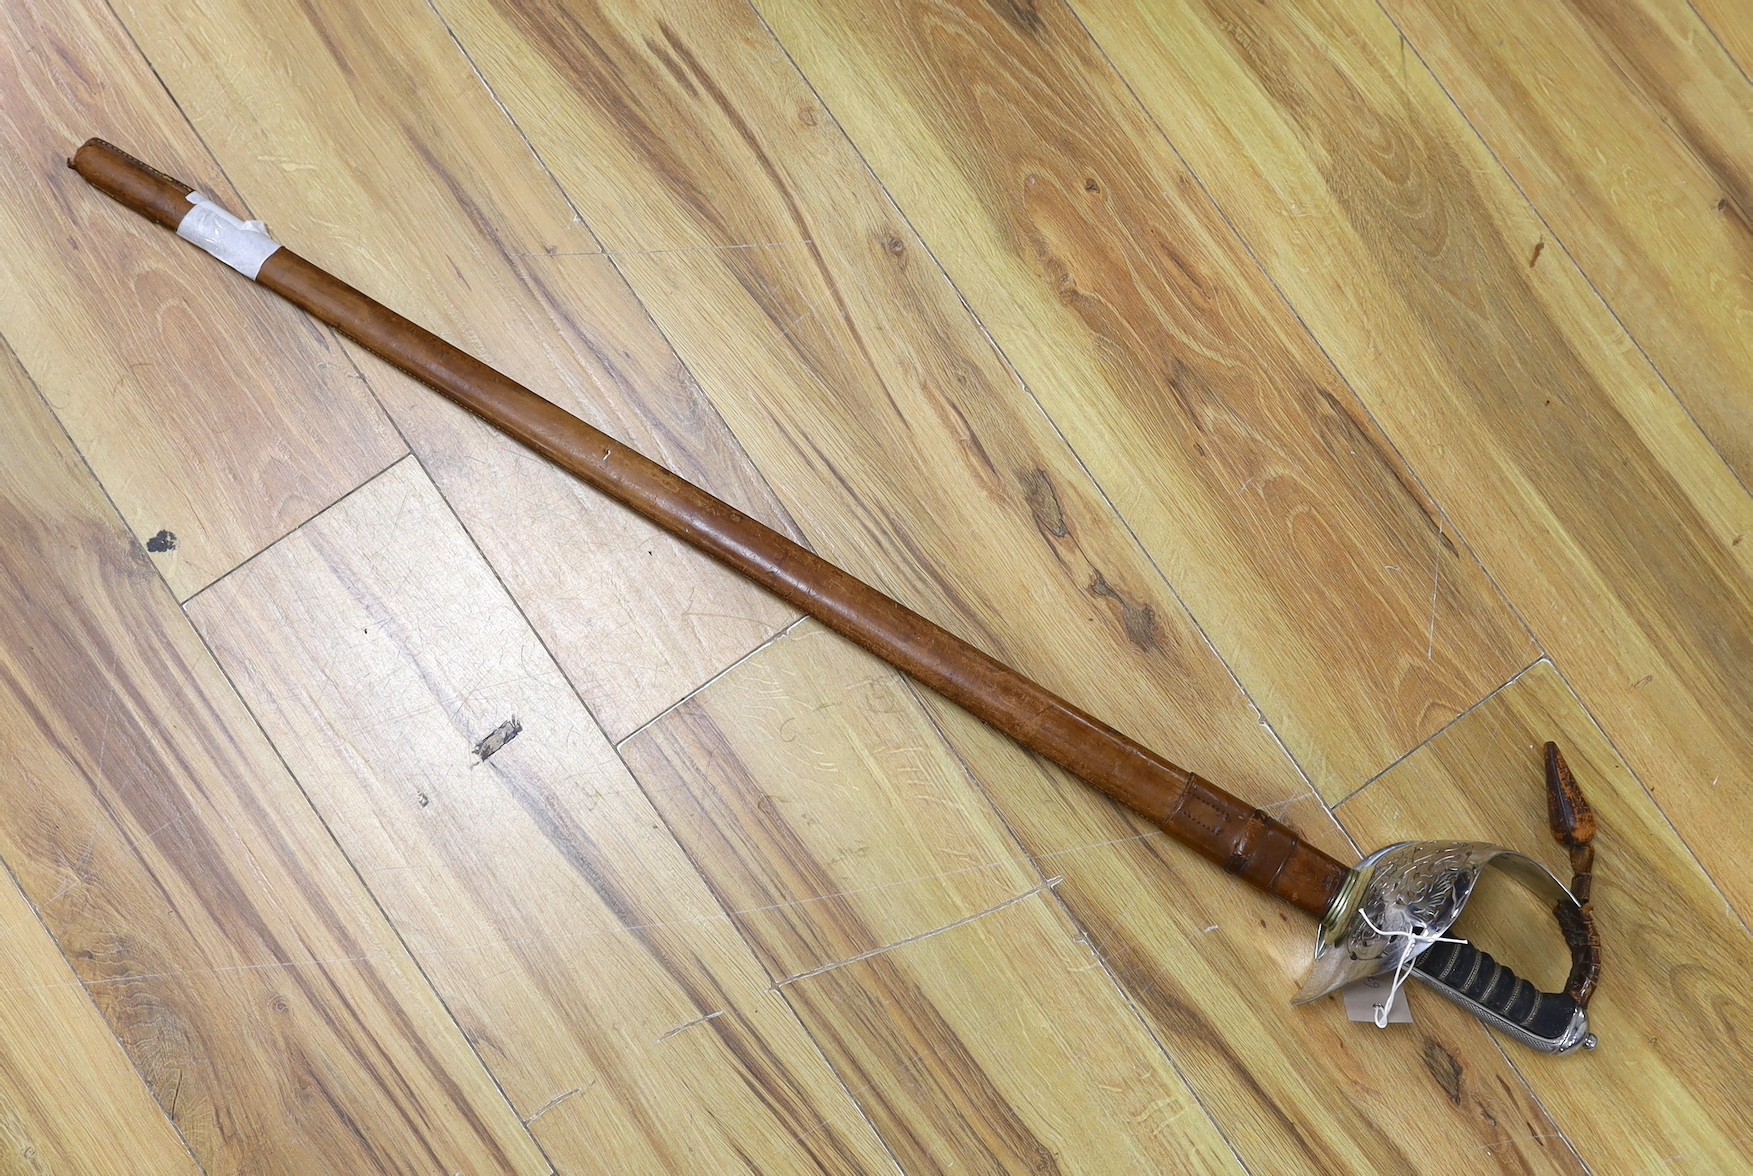 A Wilkinson George V officer's dress sword, stamped 1930 with broad arrow